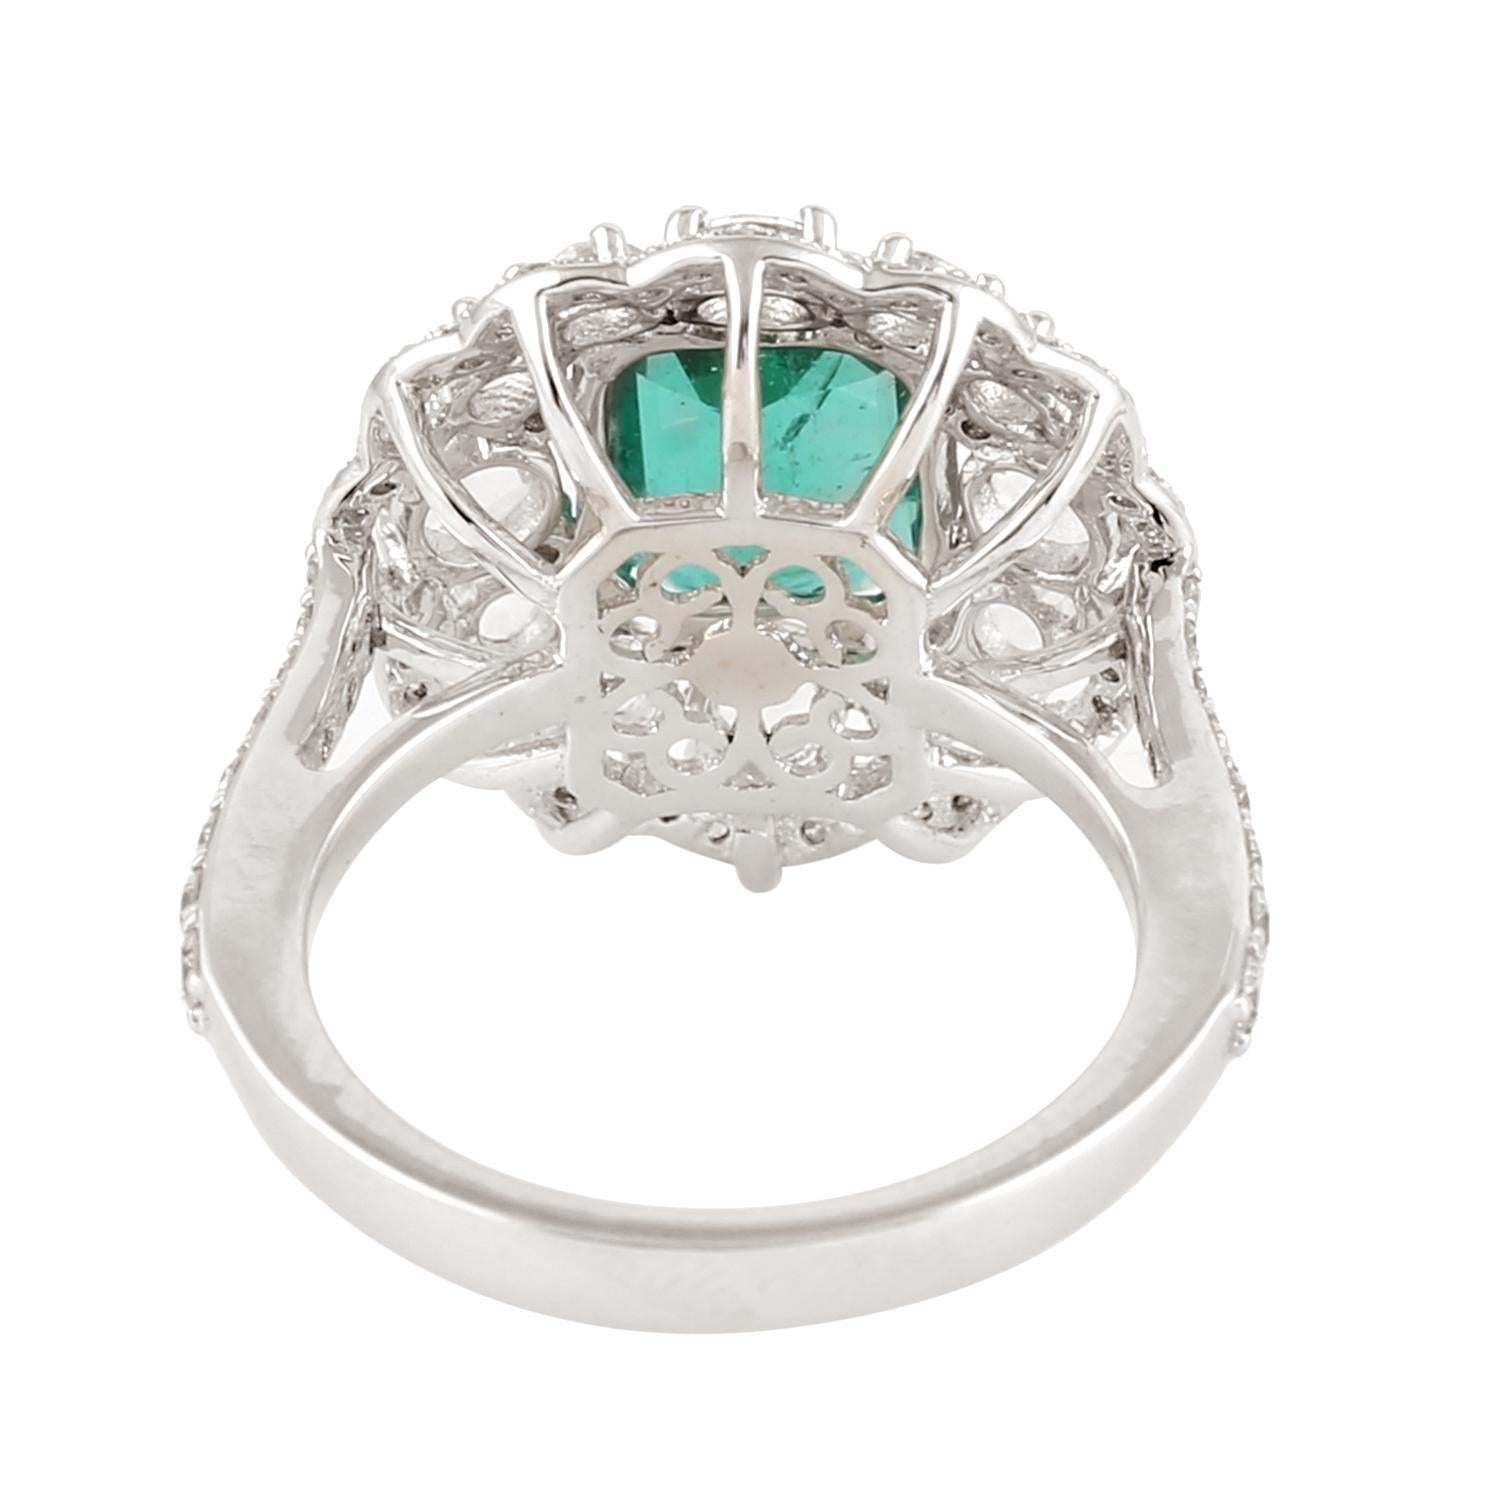 Mixed Cut 1.20Ct Zambian Emerald Flower Shaped Cocktail Ring Accented By Rose Cut Diamonds For Sale